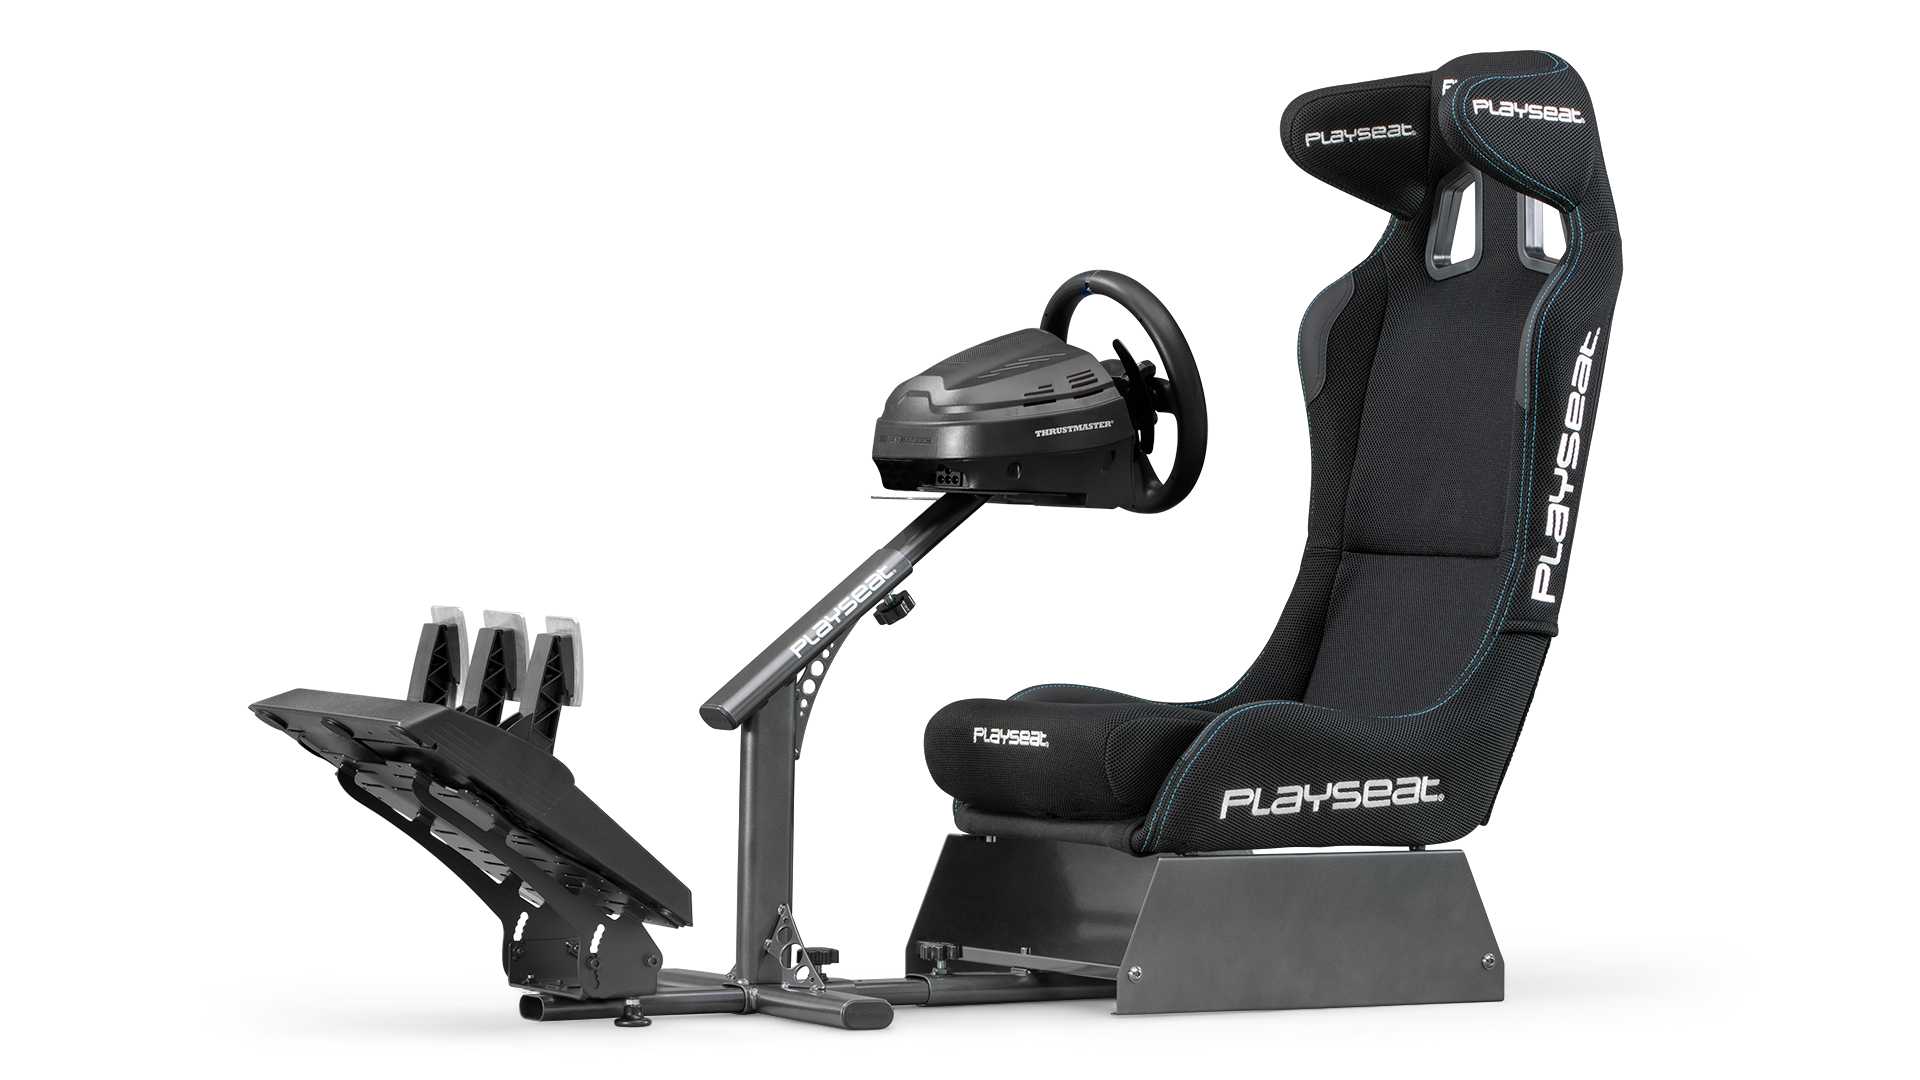 playseat-evolution-pro-black-actifit-racing-simulator-front-angle-view-thrustmaster-1920x1080-1.png